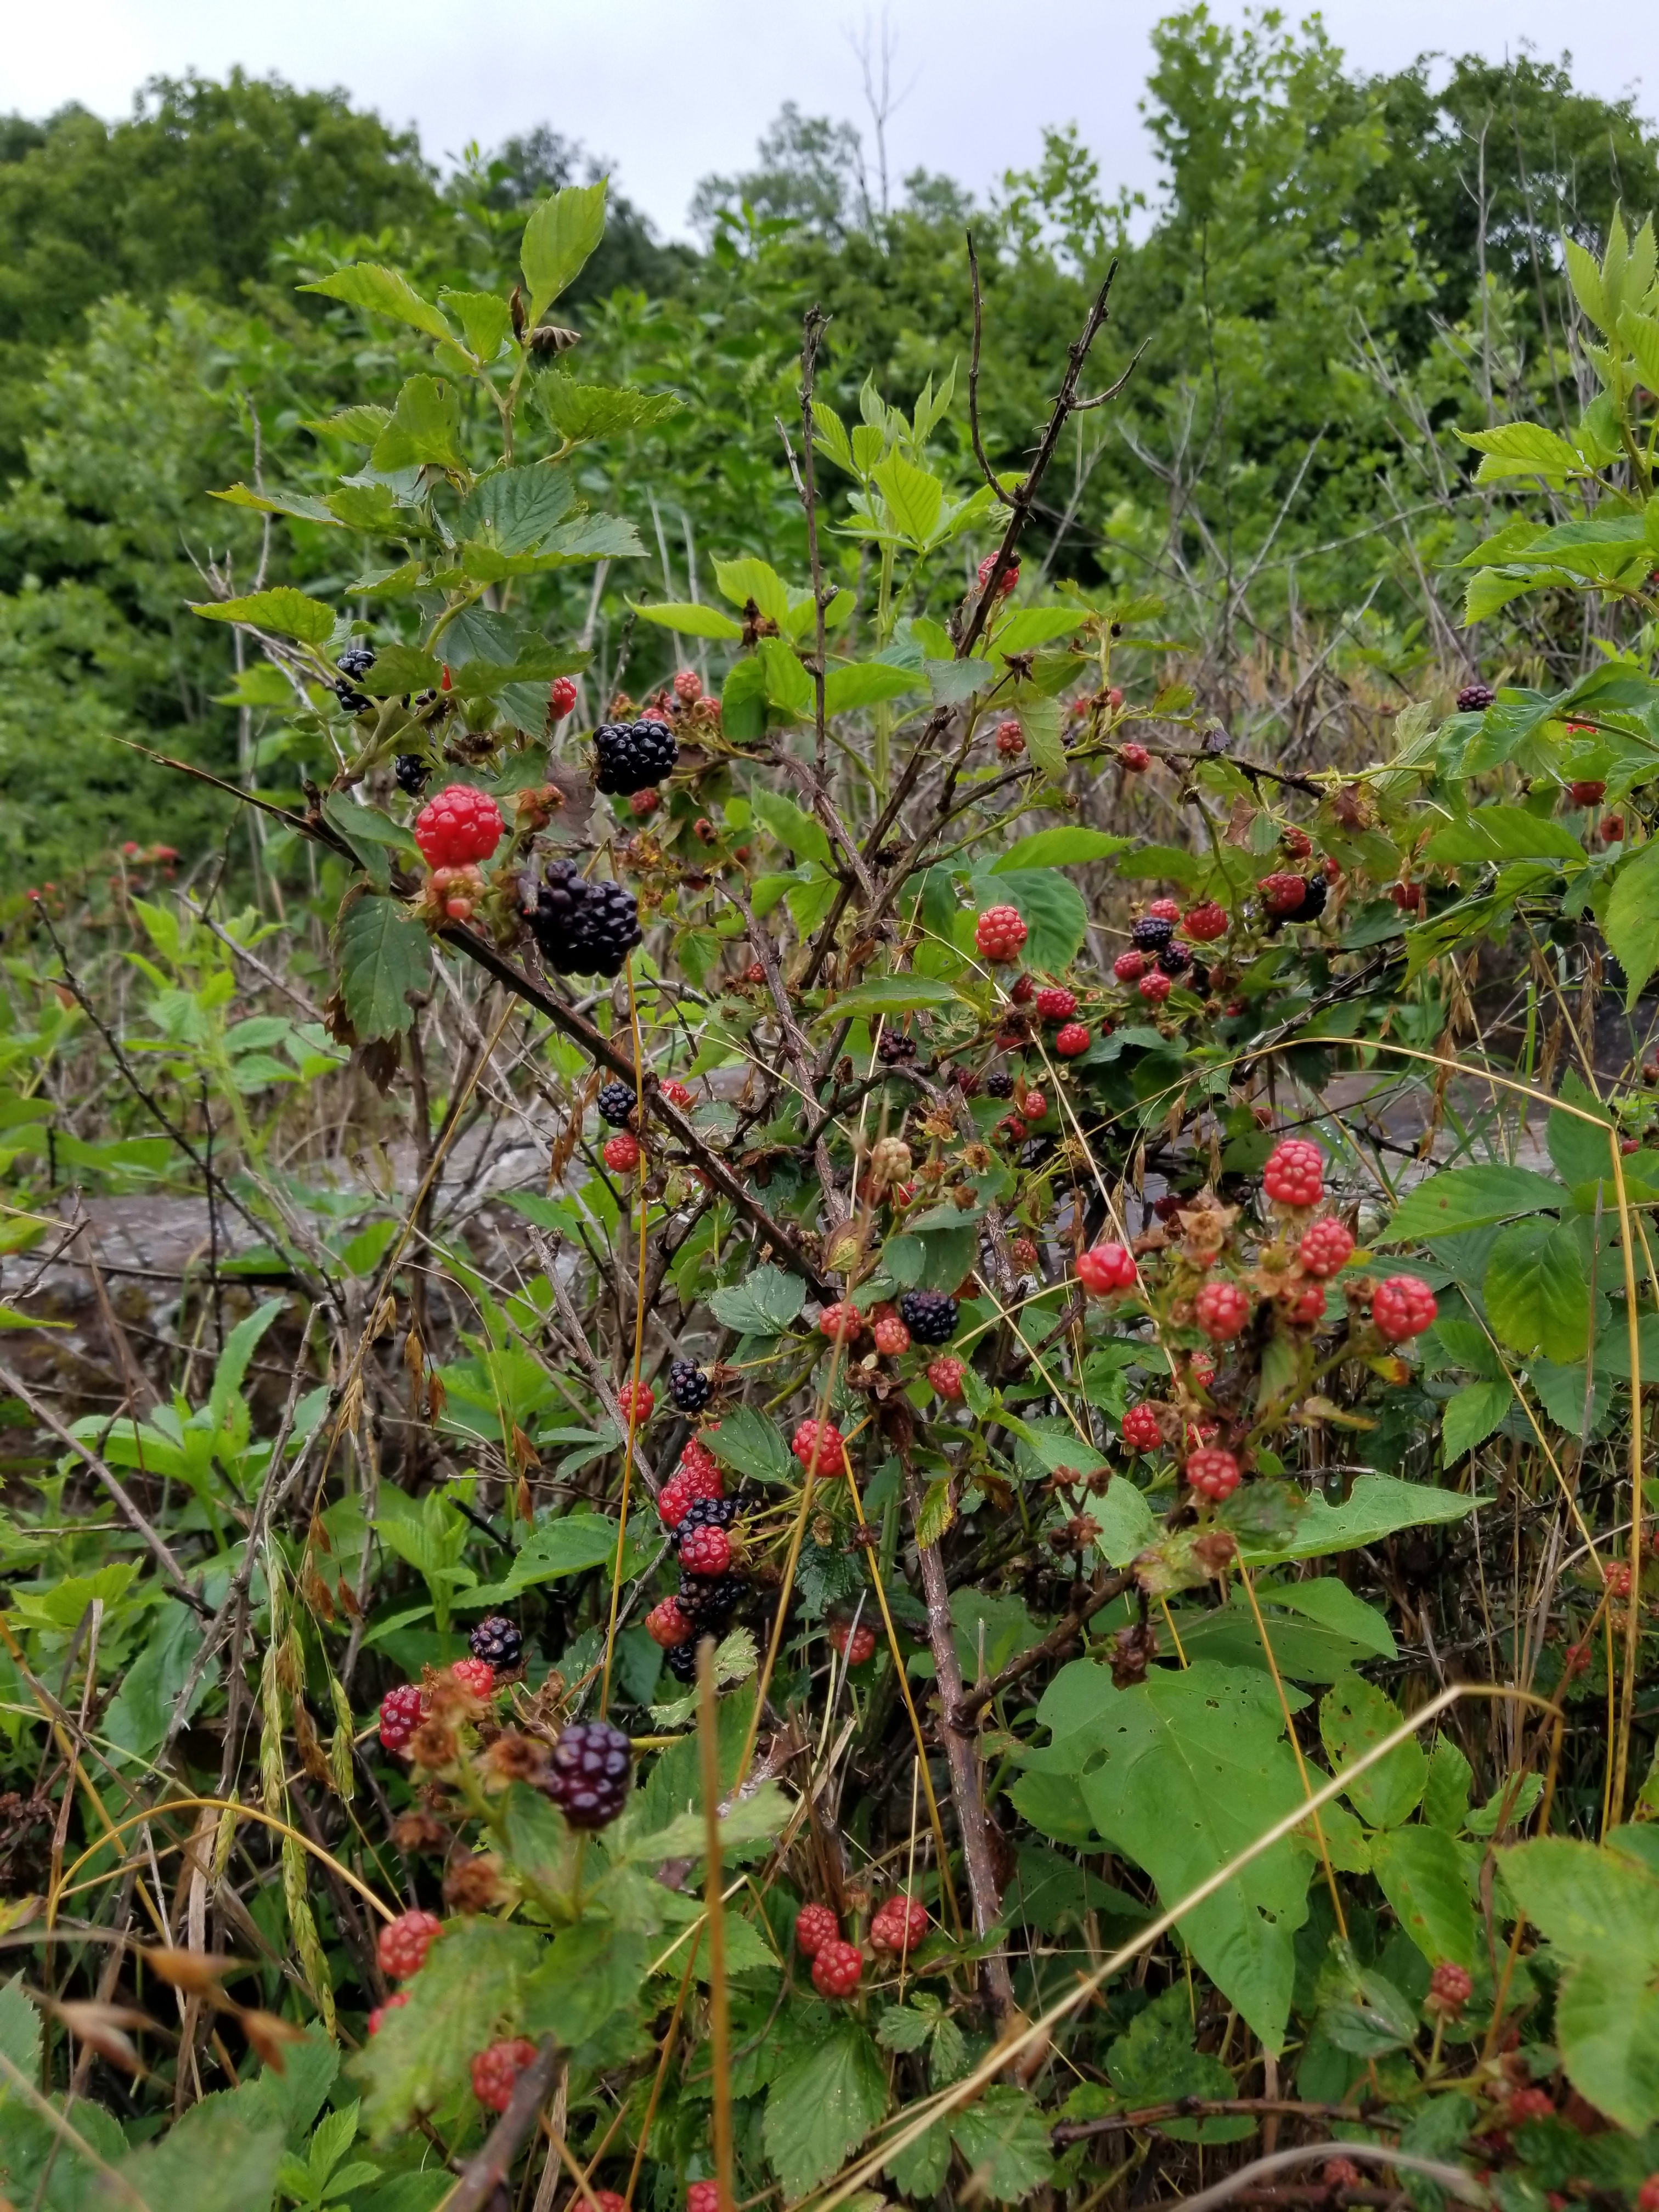 The blackberry patch.